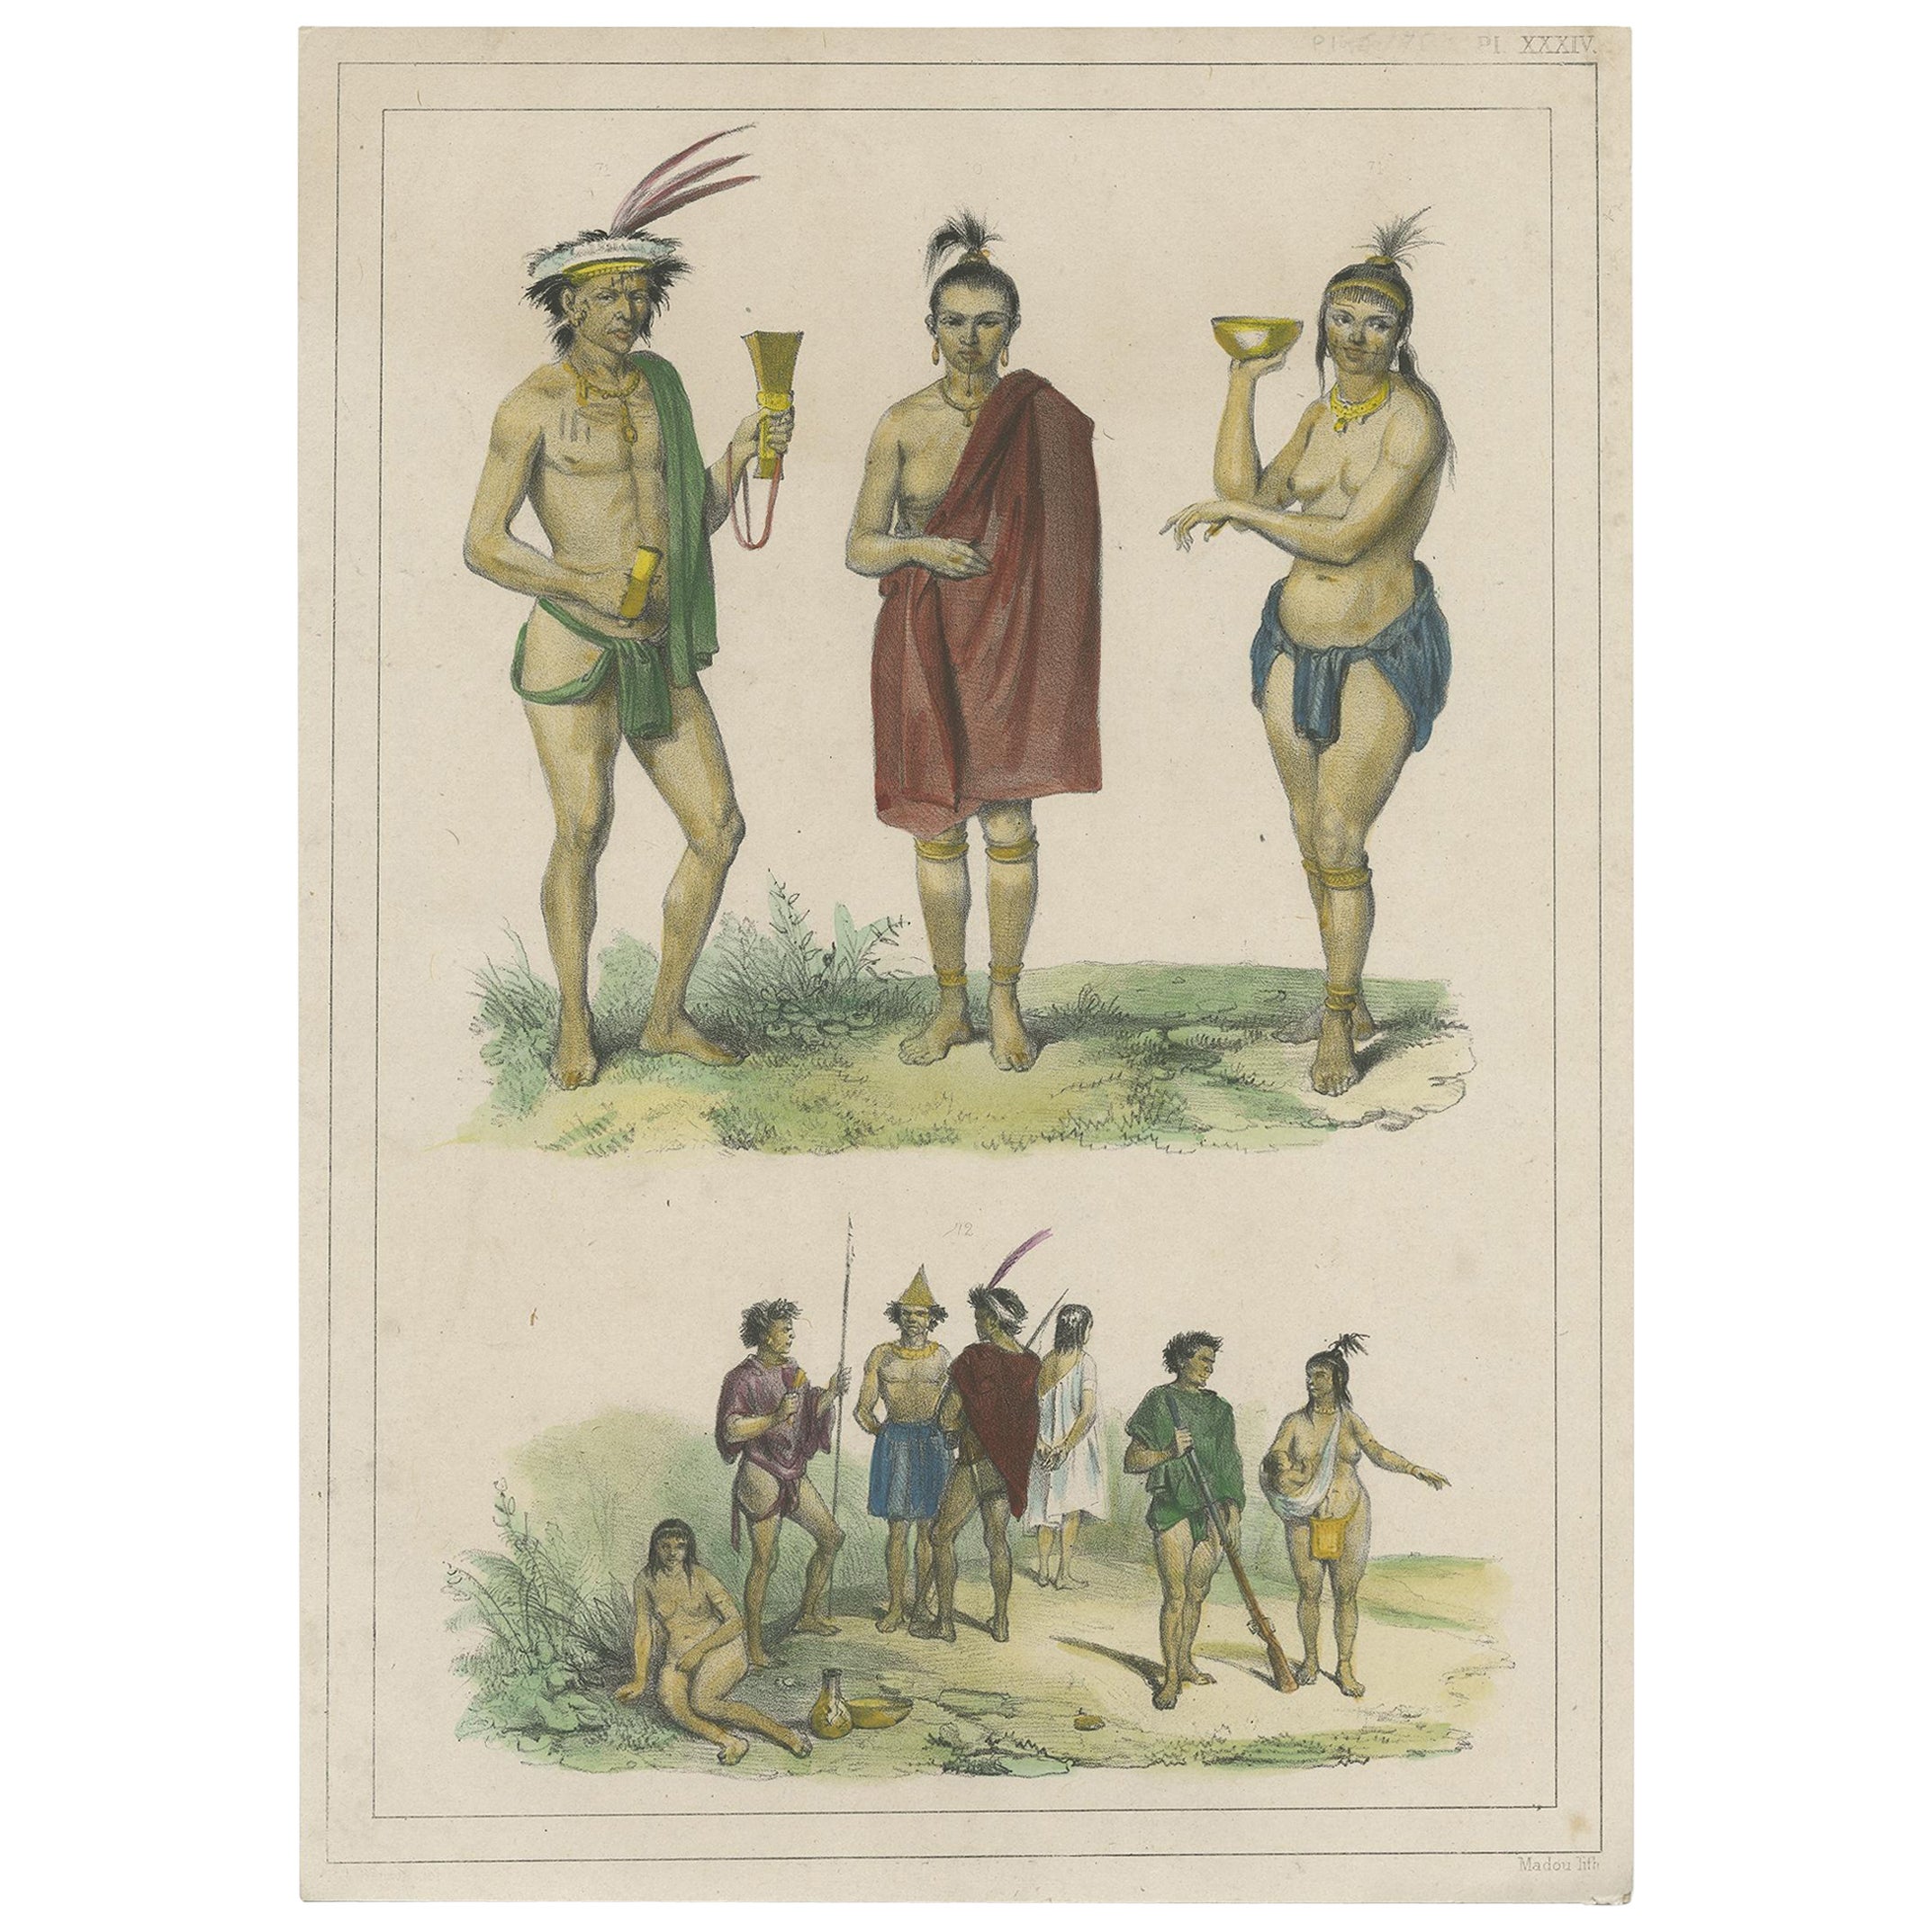 Decorative Print of Natives of the Caribbean Showing Tattoos & Costumes, 1839